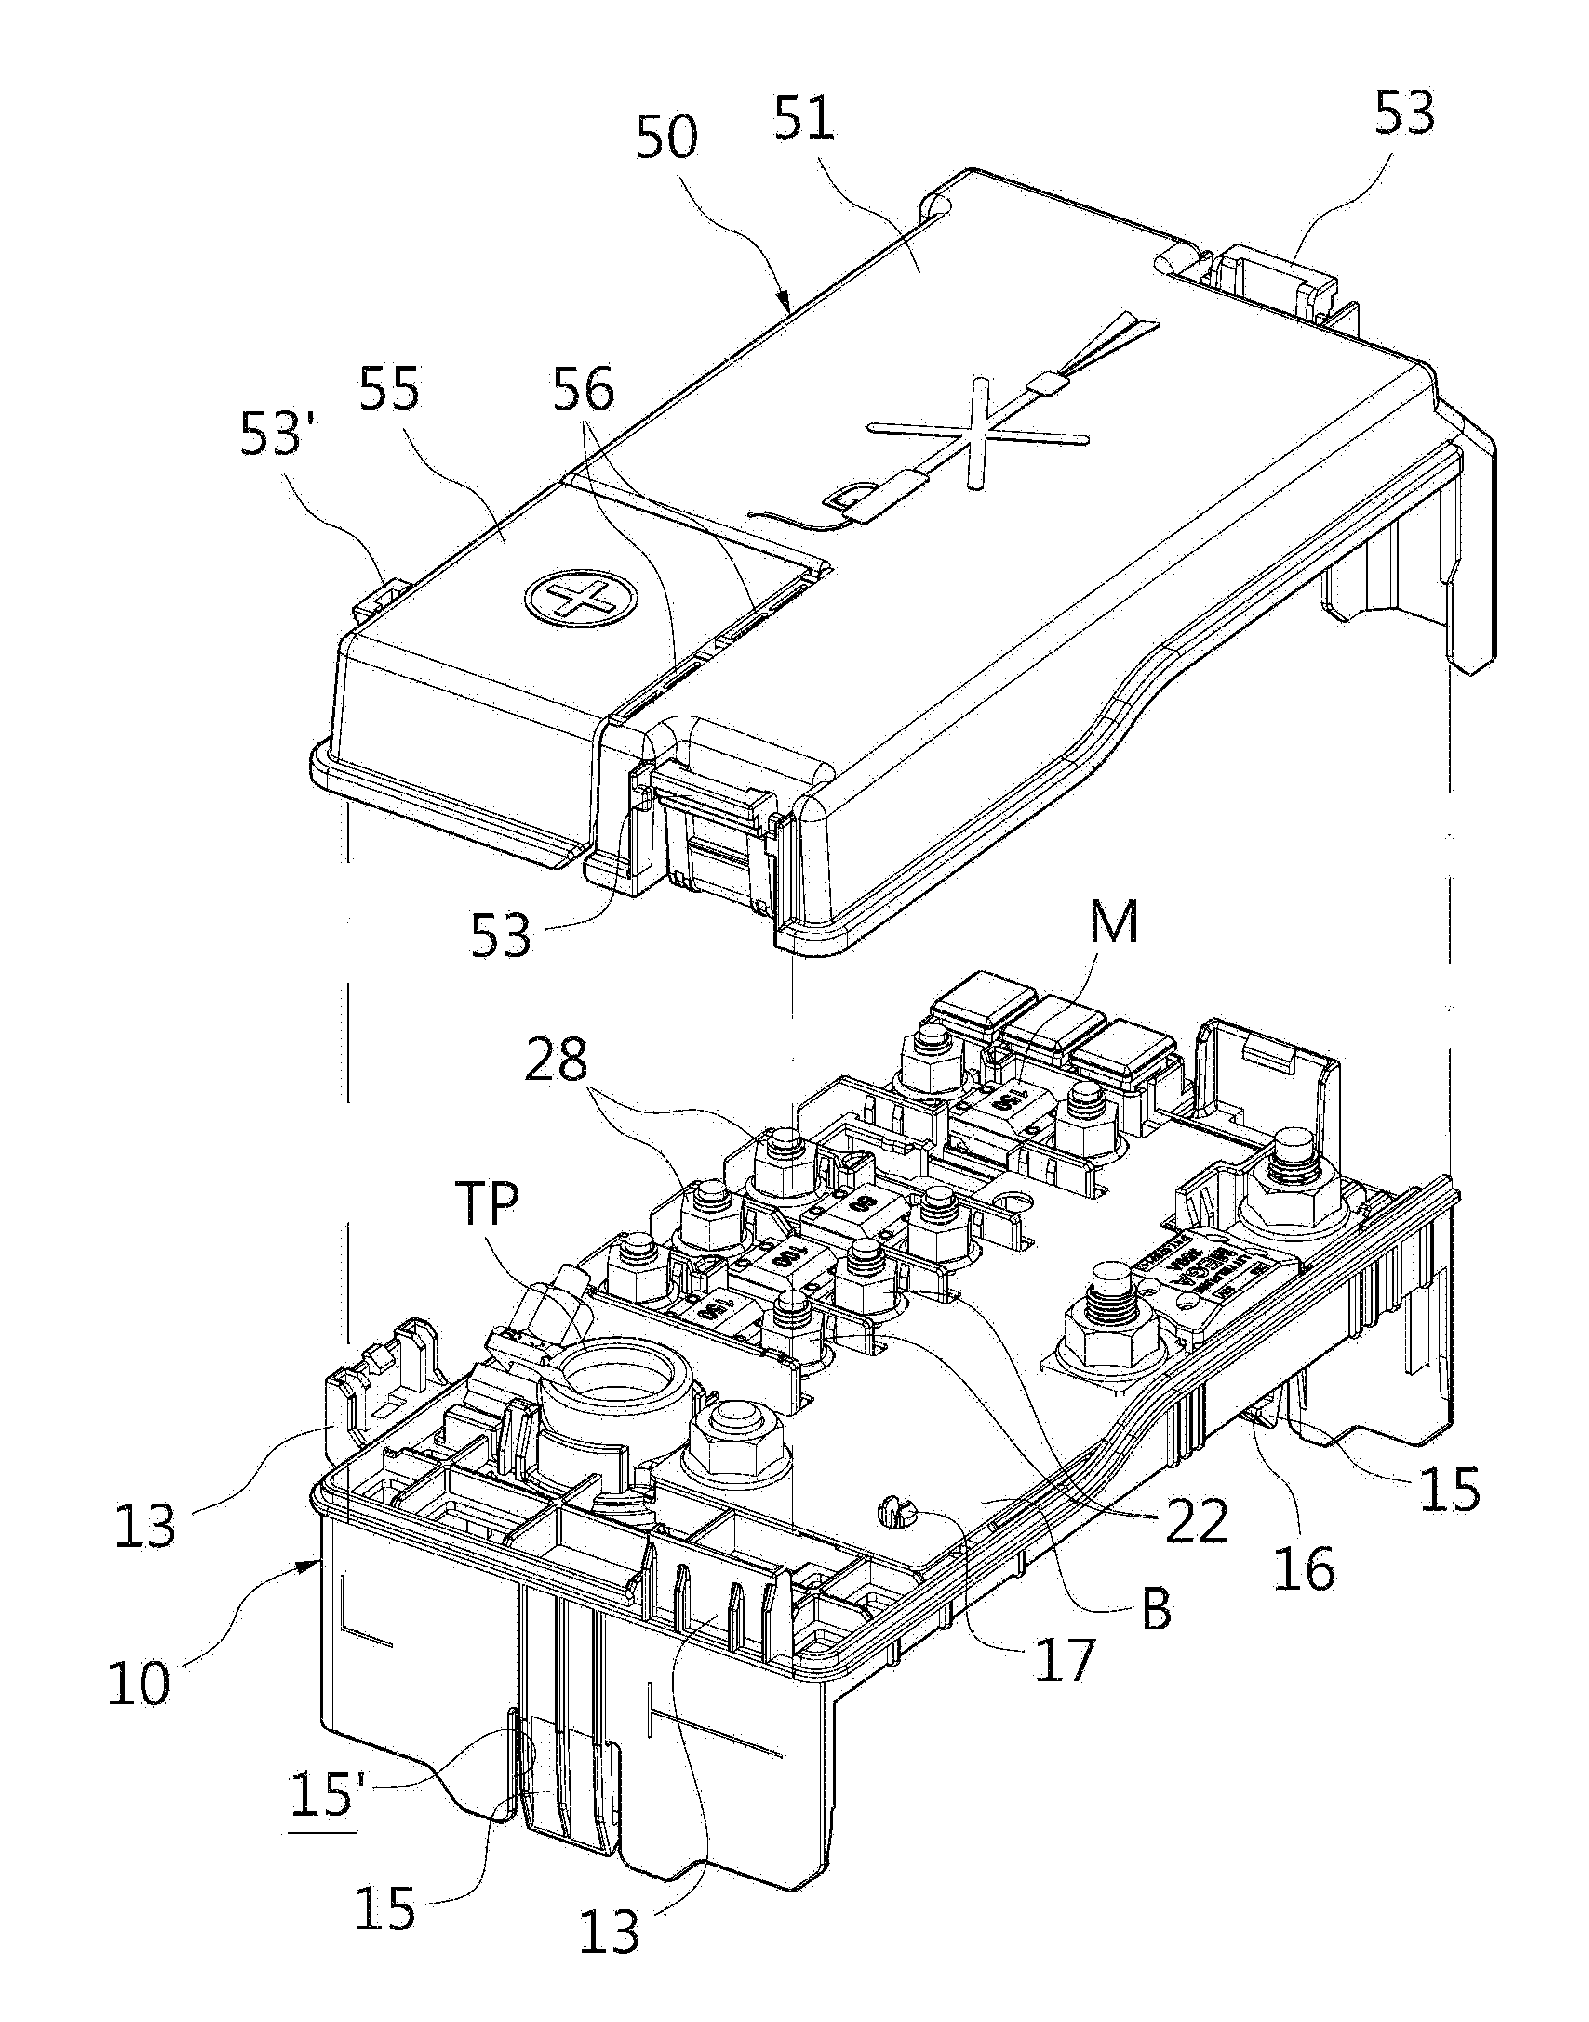 Battery block for vehicle